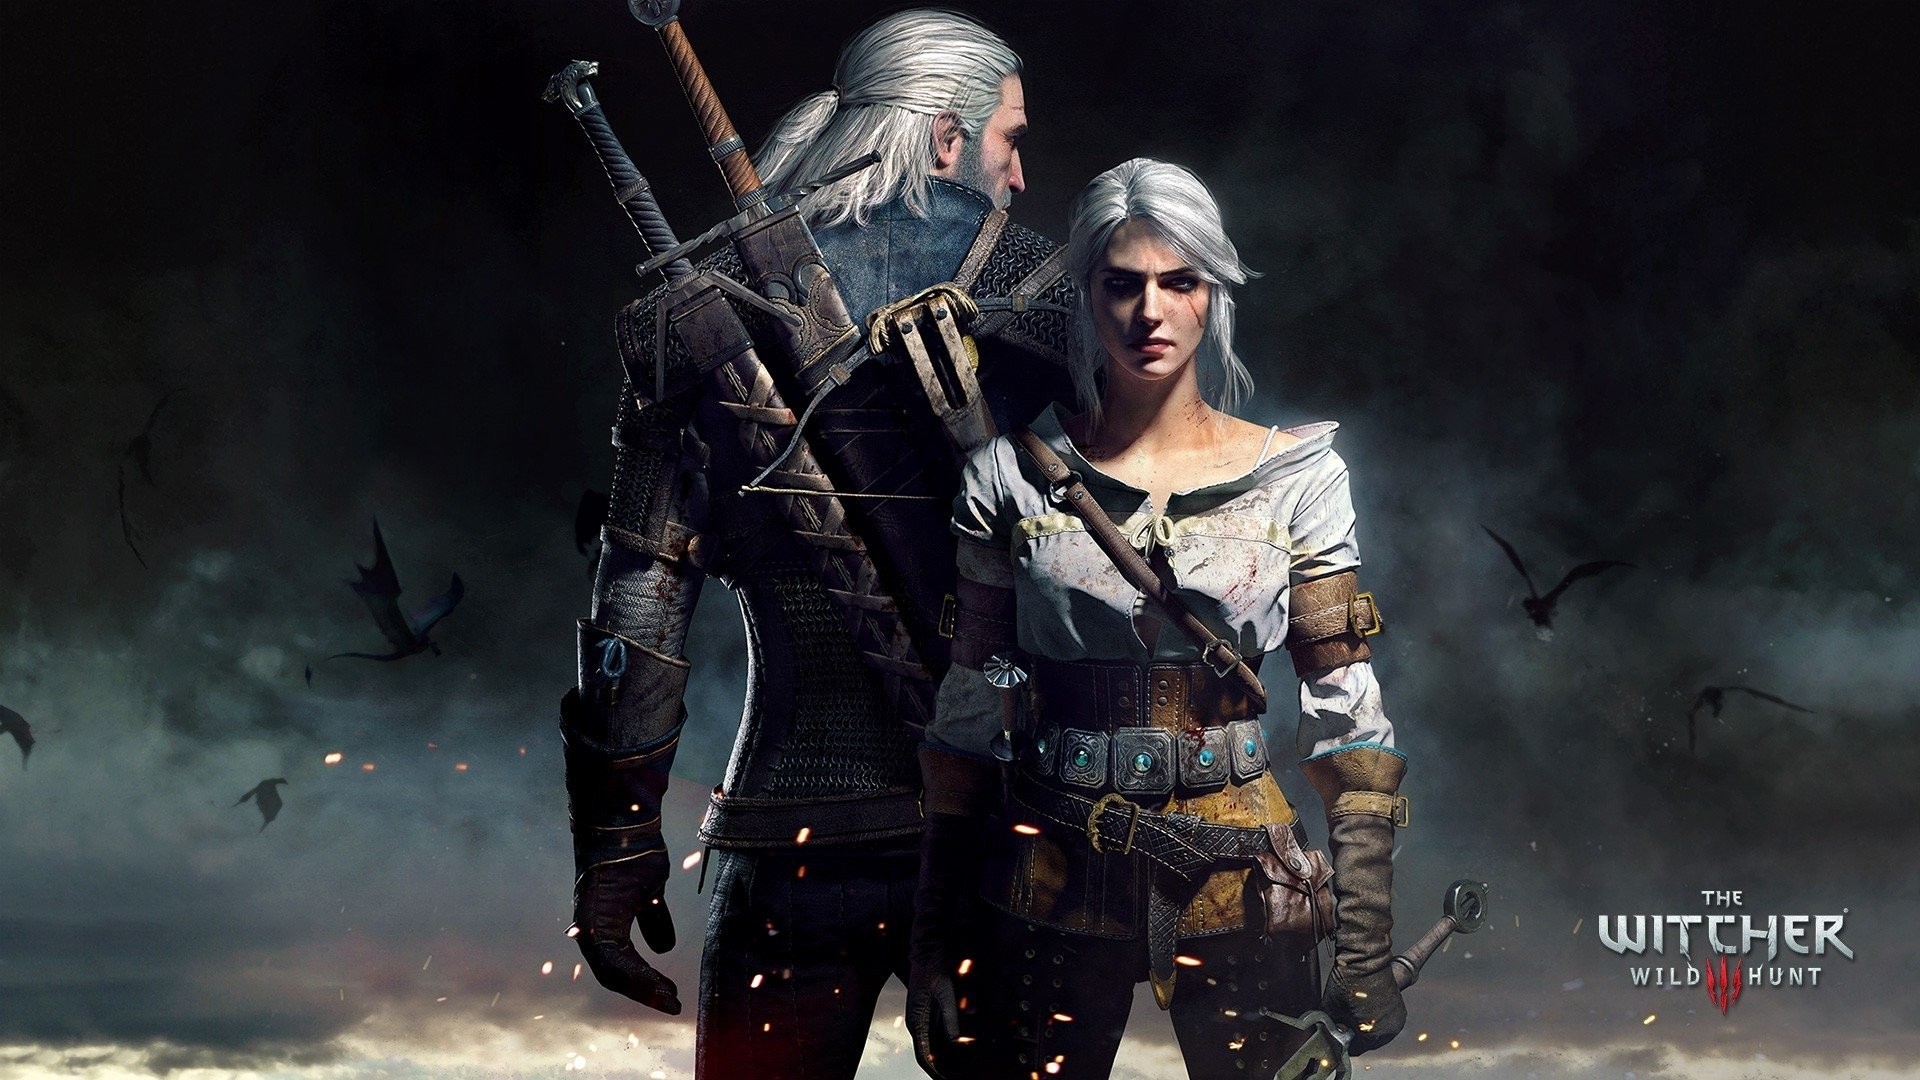 Desktop Wallpaper The Witcher with high-resolution 1920x1080 pixel. You can use this wallpaper for your Windows and Mac OS computers as well as your Android and iPhone smartphones